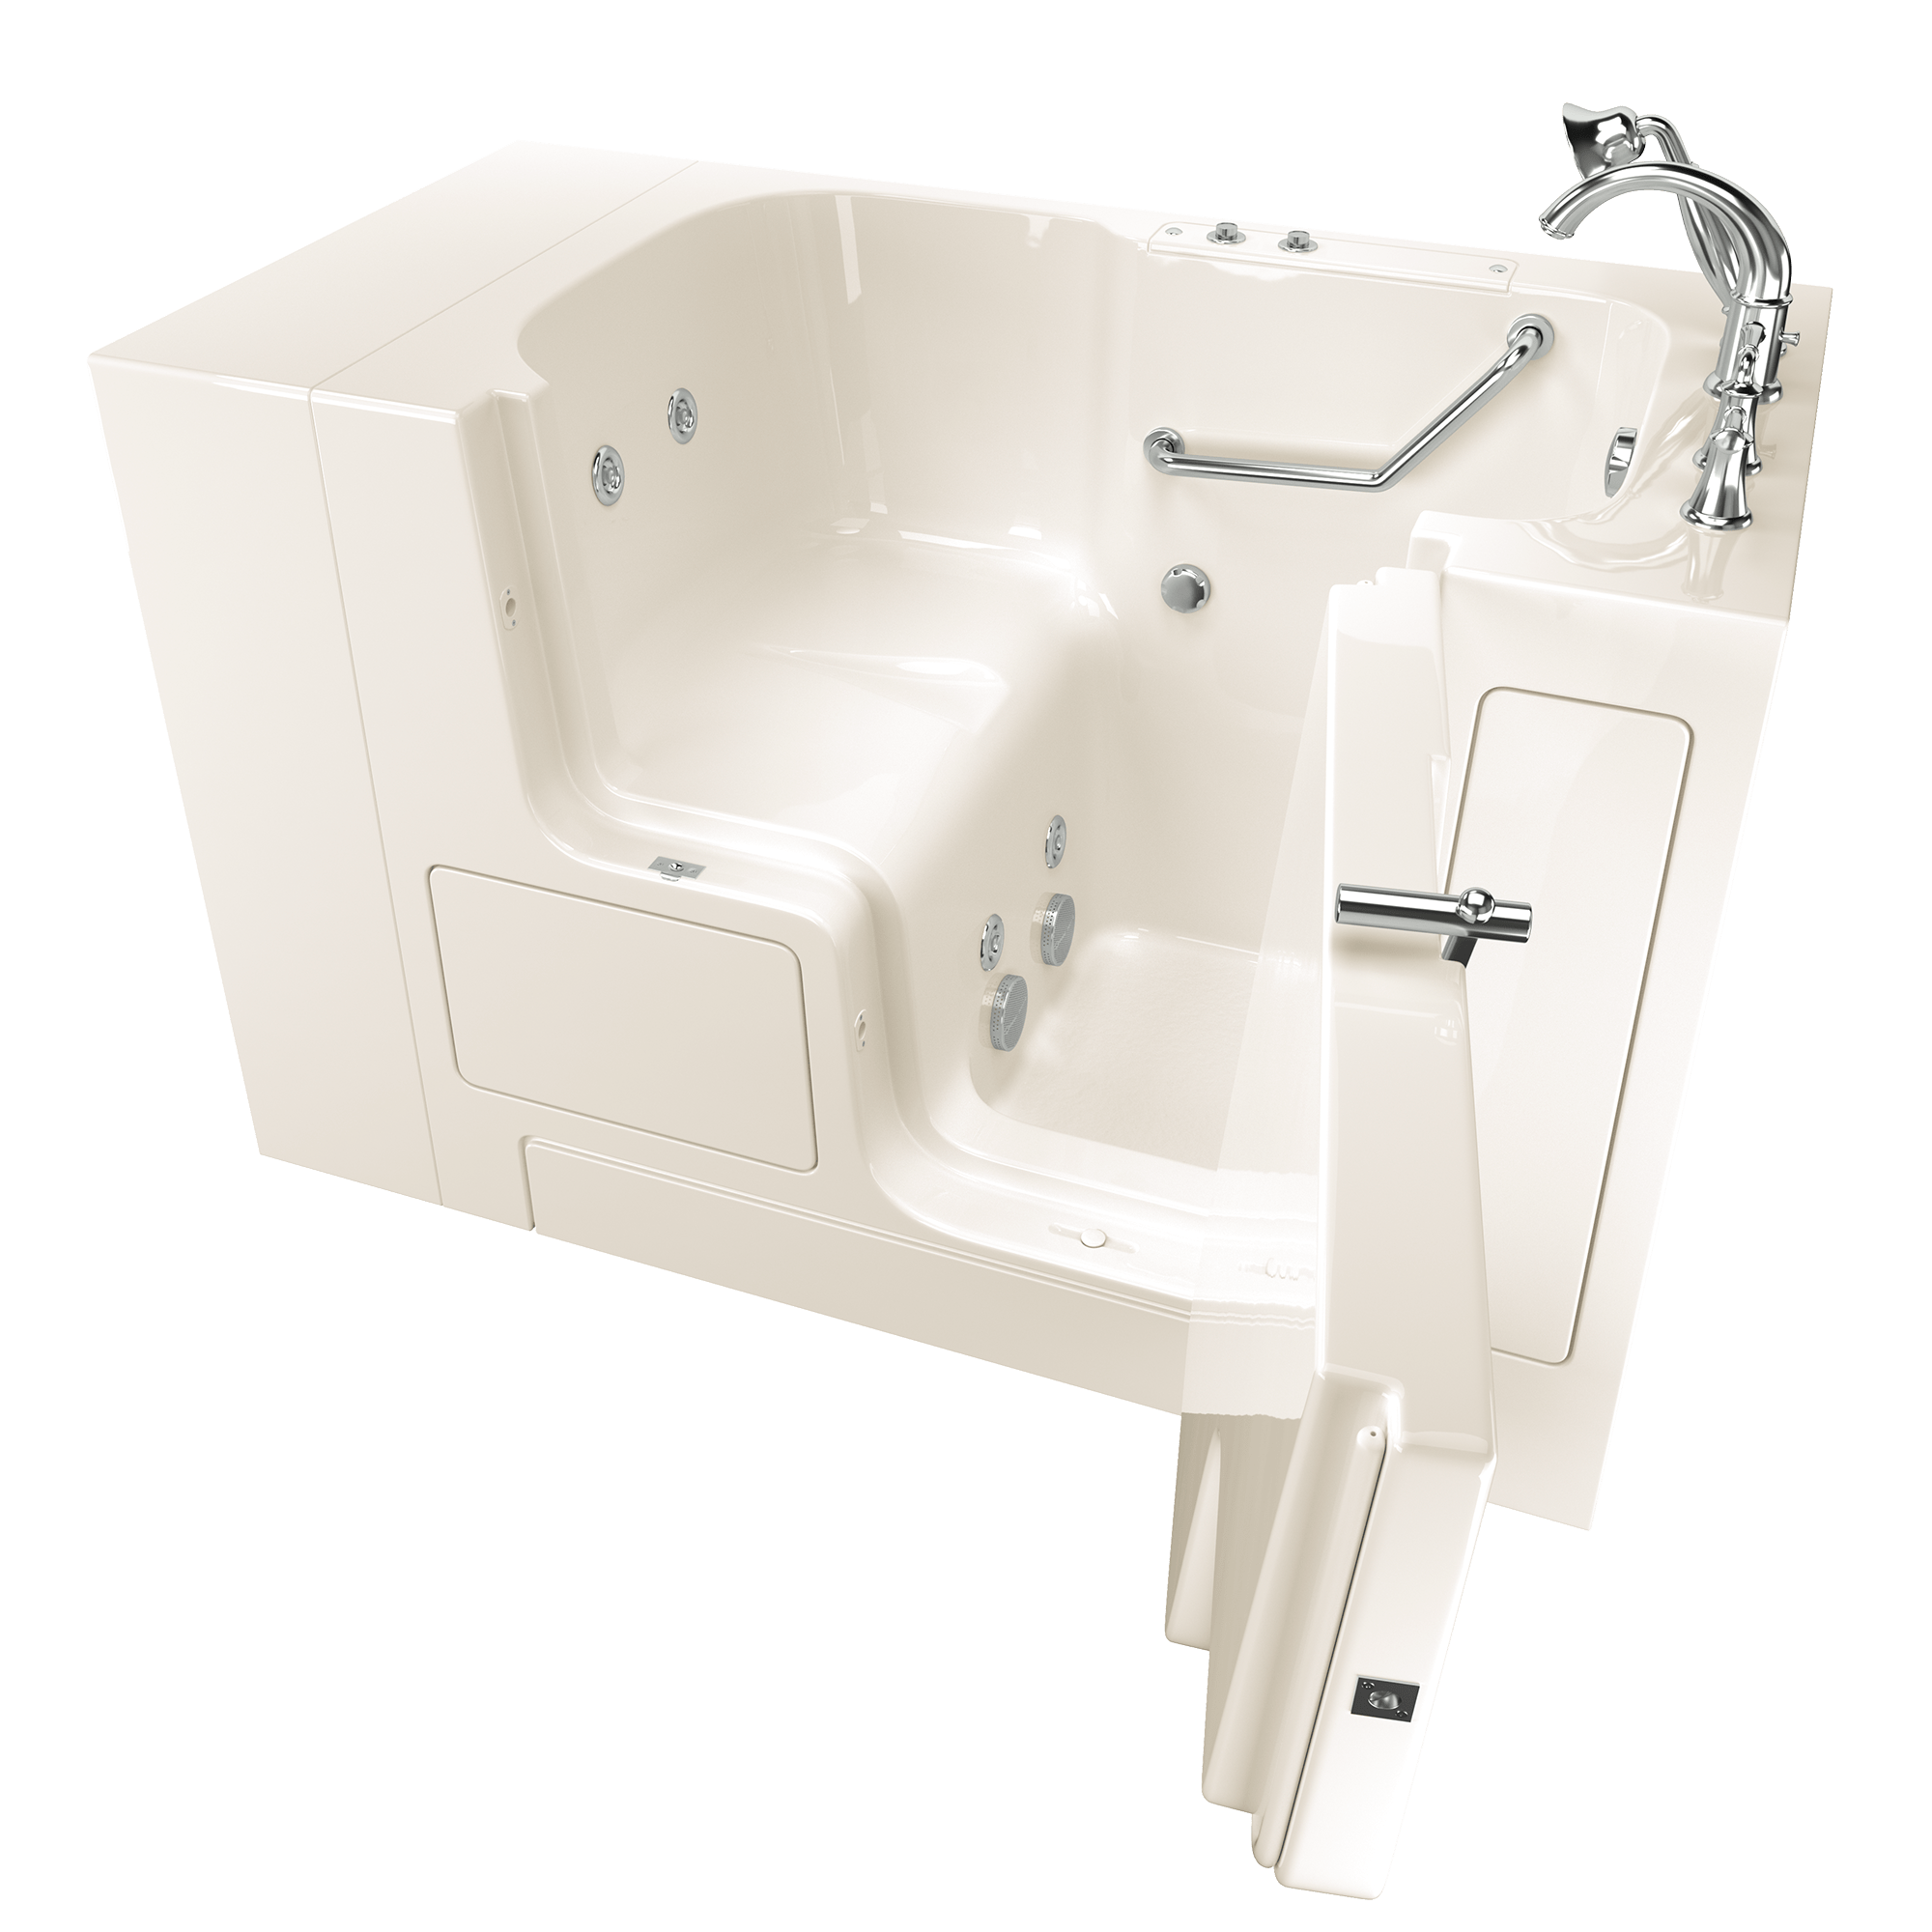 Gelcoat Value Series 32 x 52 -Inch Walk-in Tub With Whirlpool System - Right-Hand Drain With Faucet